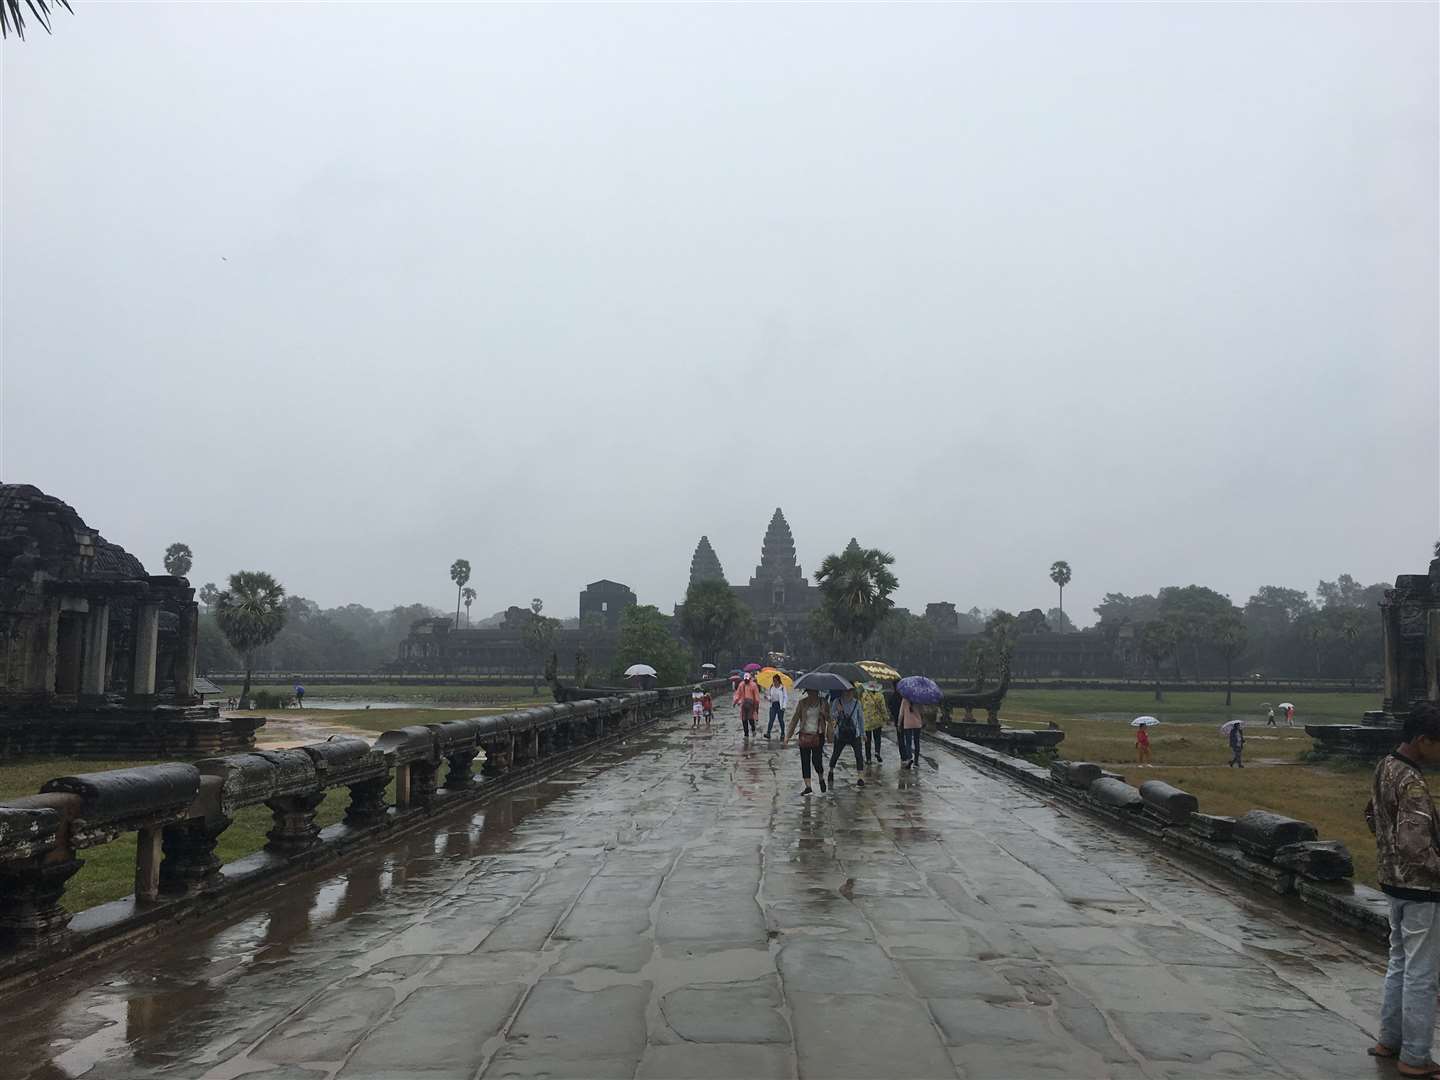 Even in the rain, the temples at Angkor Wat attract thousands of visitors a day. Picture: Matt Leclere